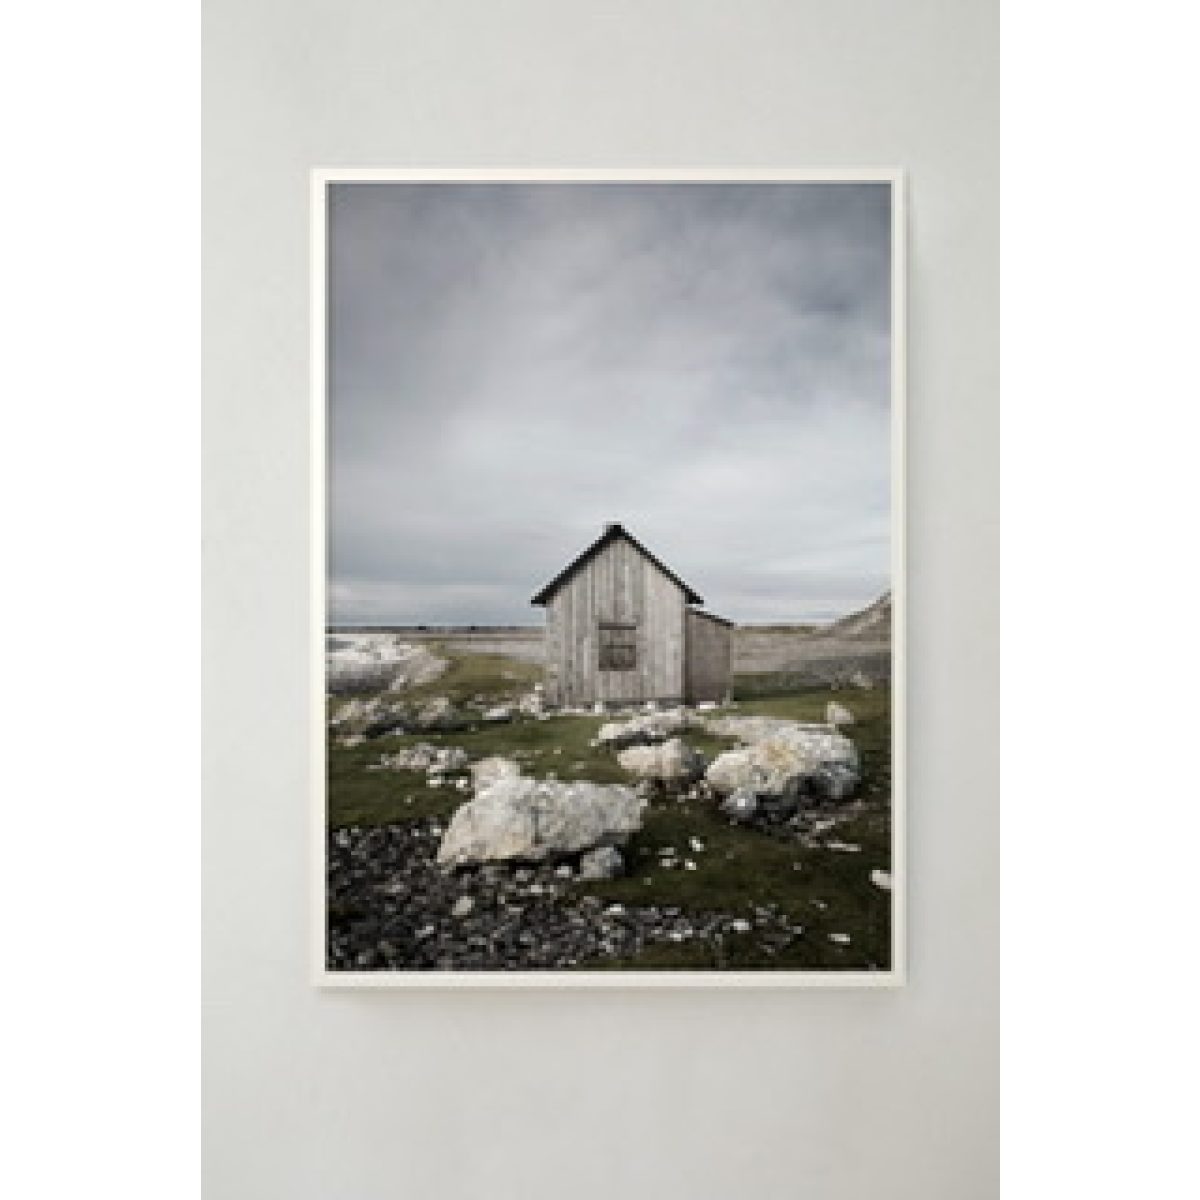 Barren Poster 30x40 cm Storefactory My Home and More